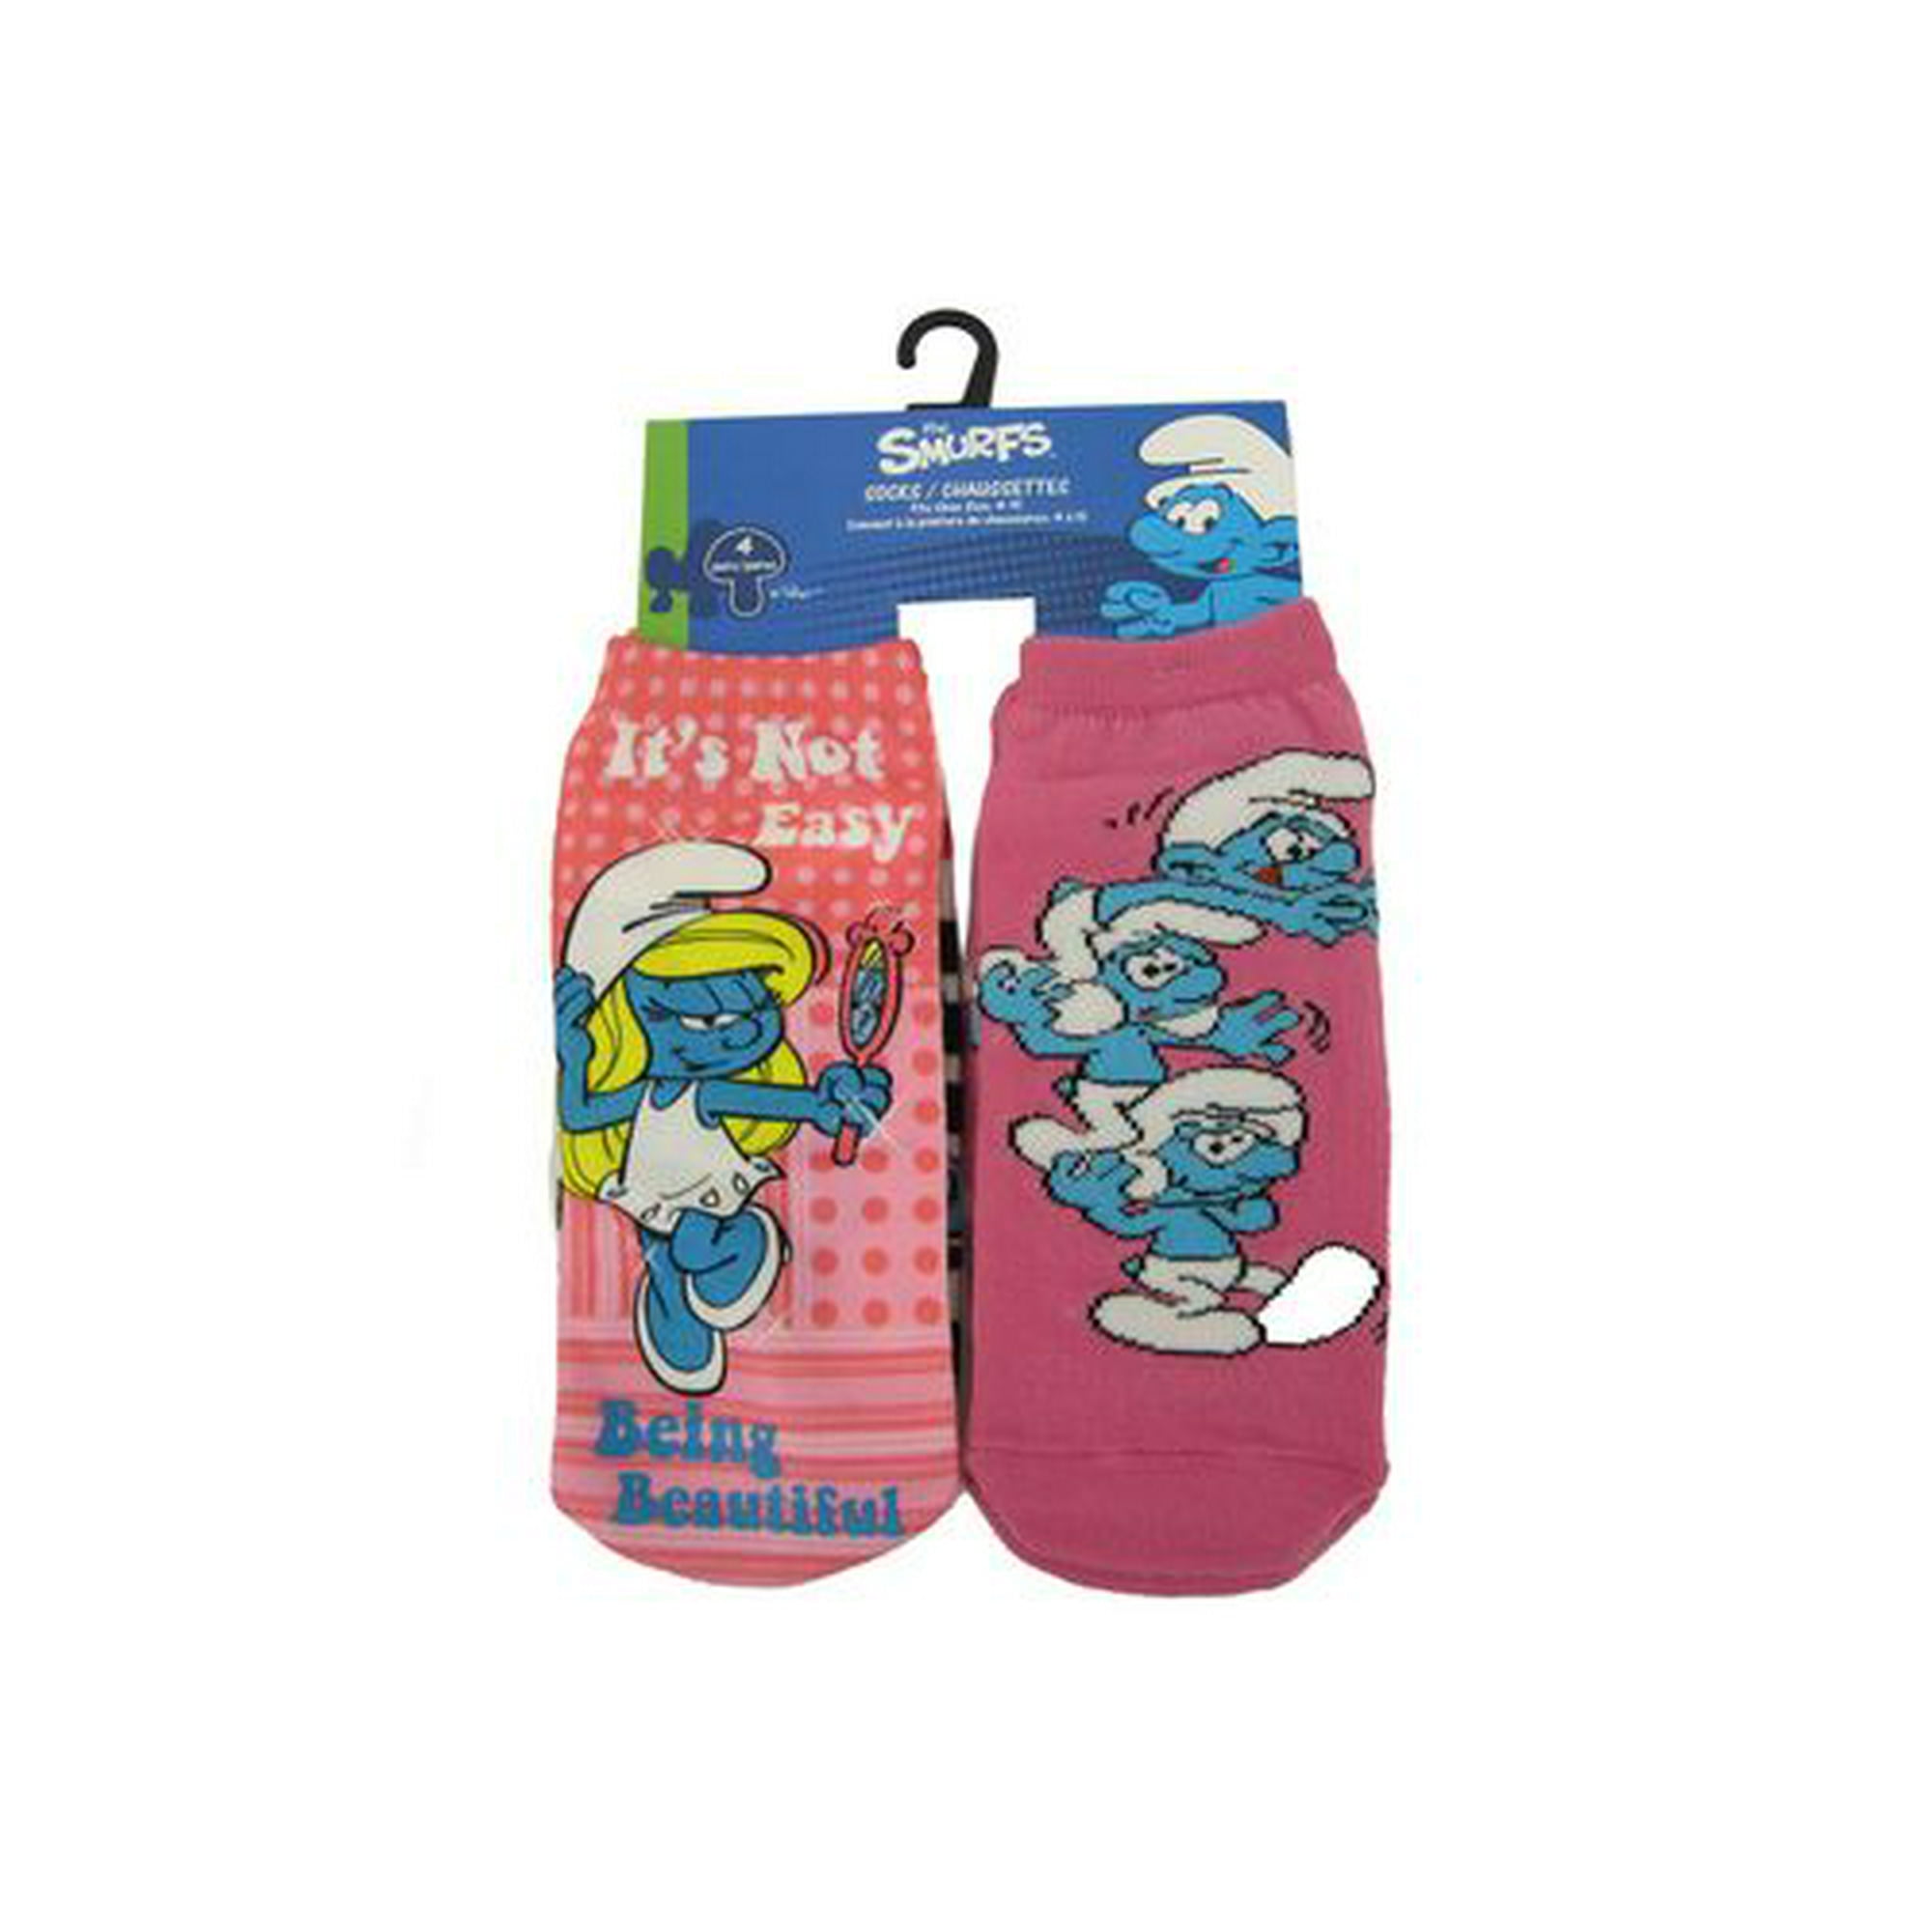 Camp Camp Characters 5 Pair Juniors Ankle Sock Pack